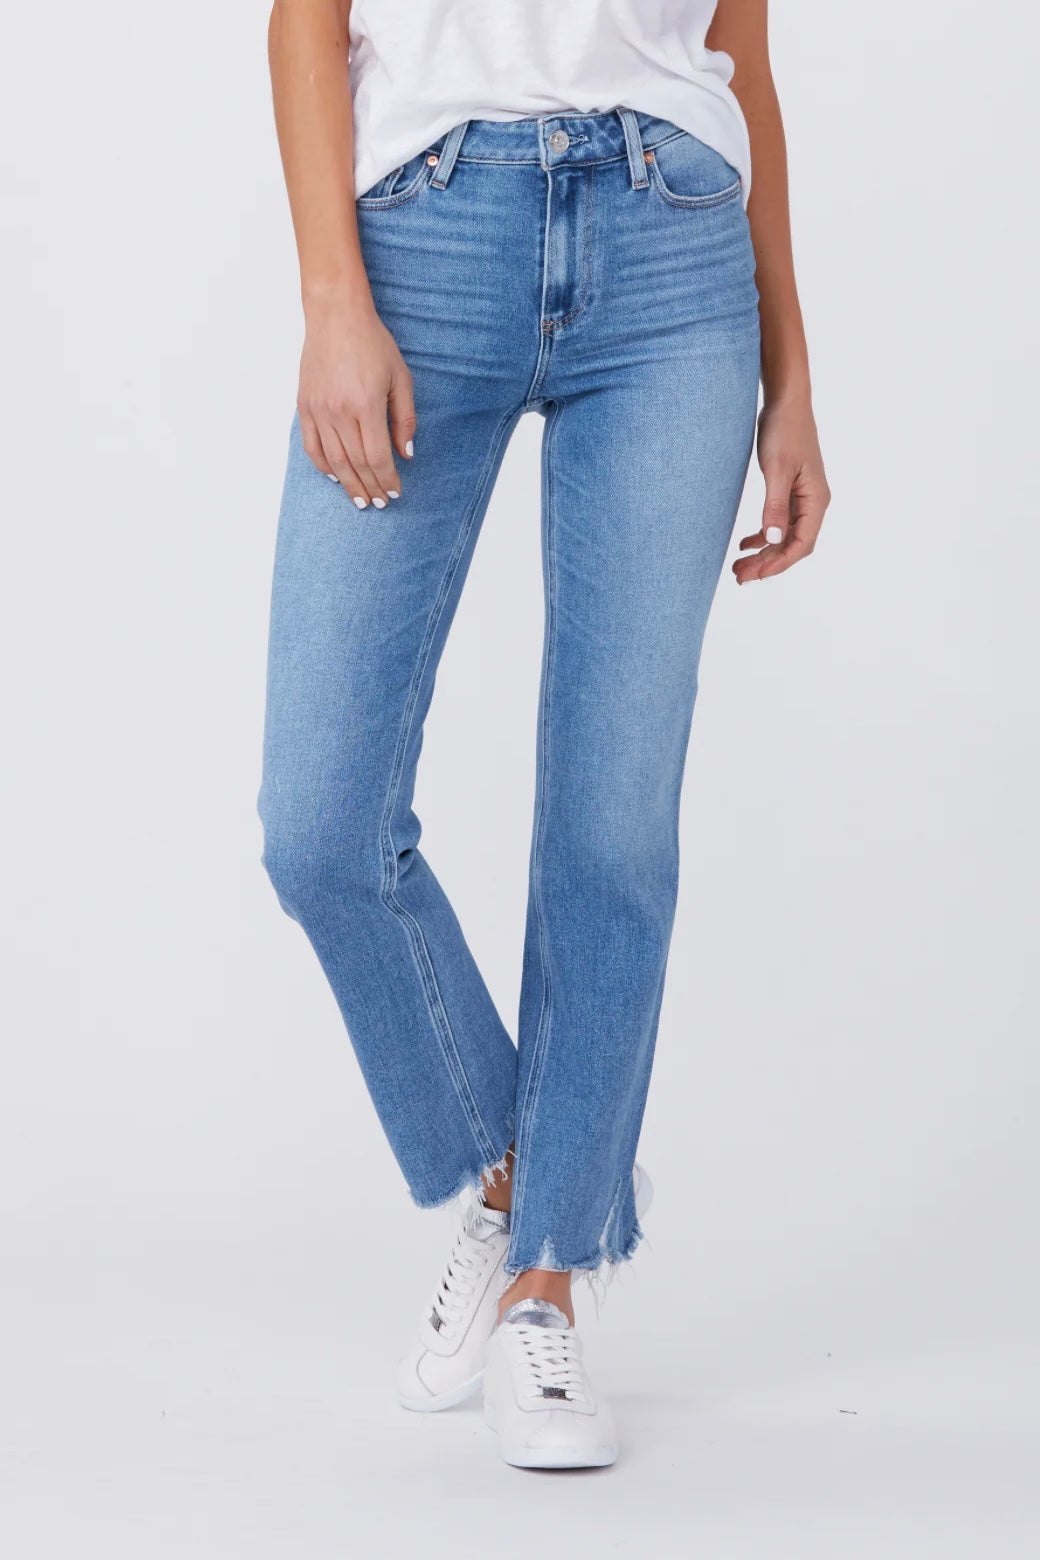 Paige - Cindy High Rise Straight Ankle Jean - Mel